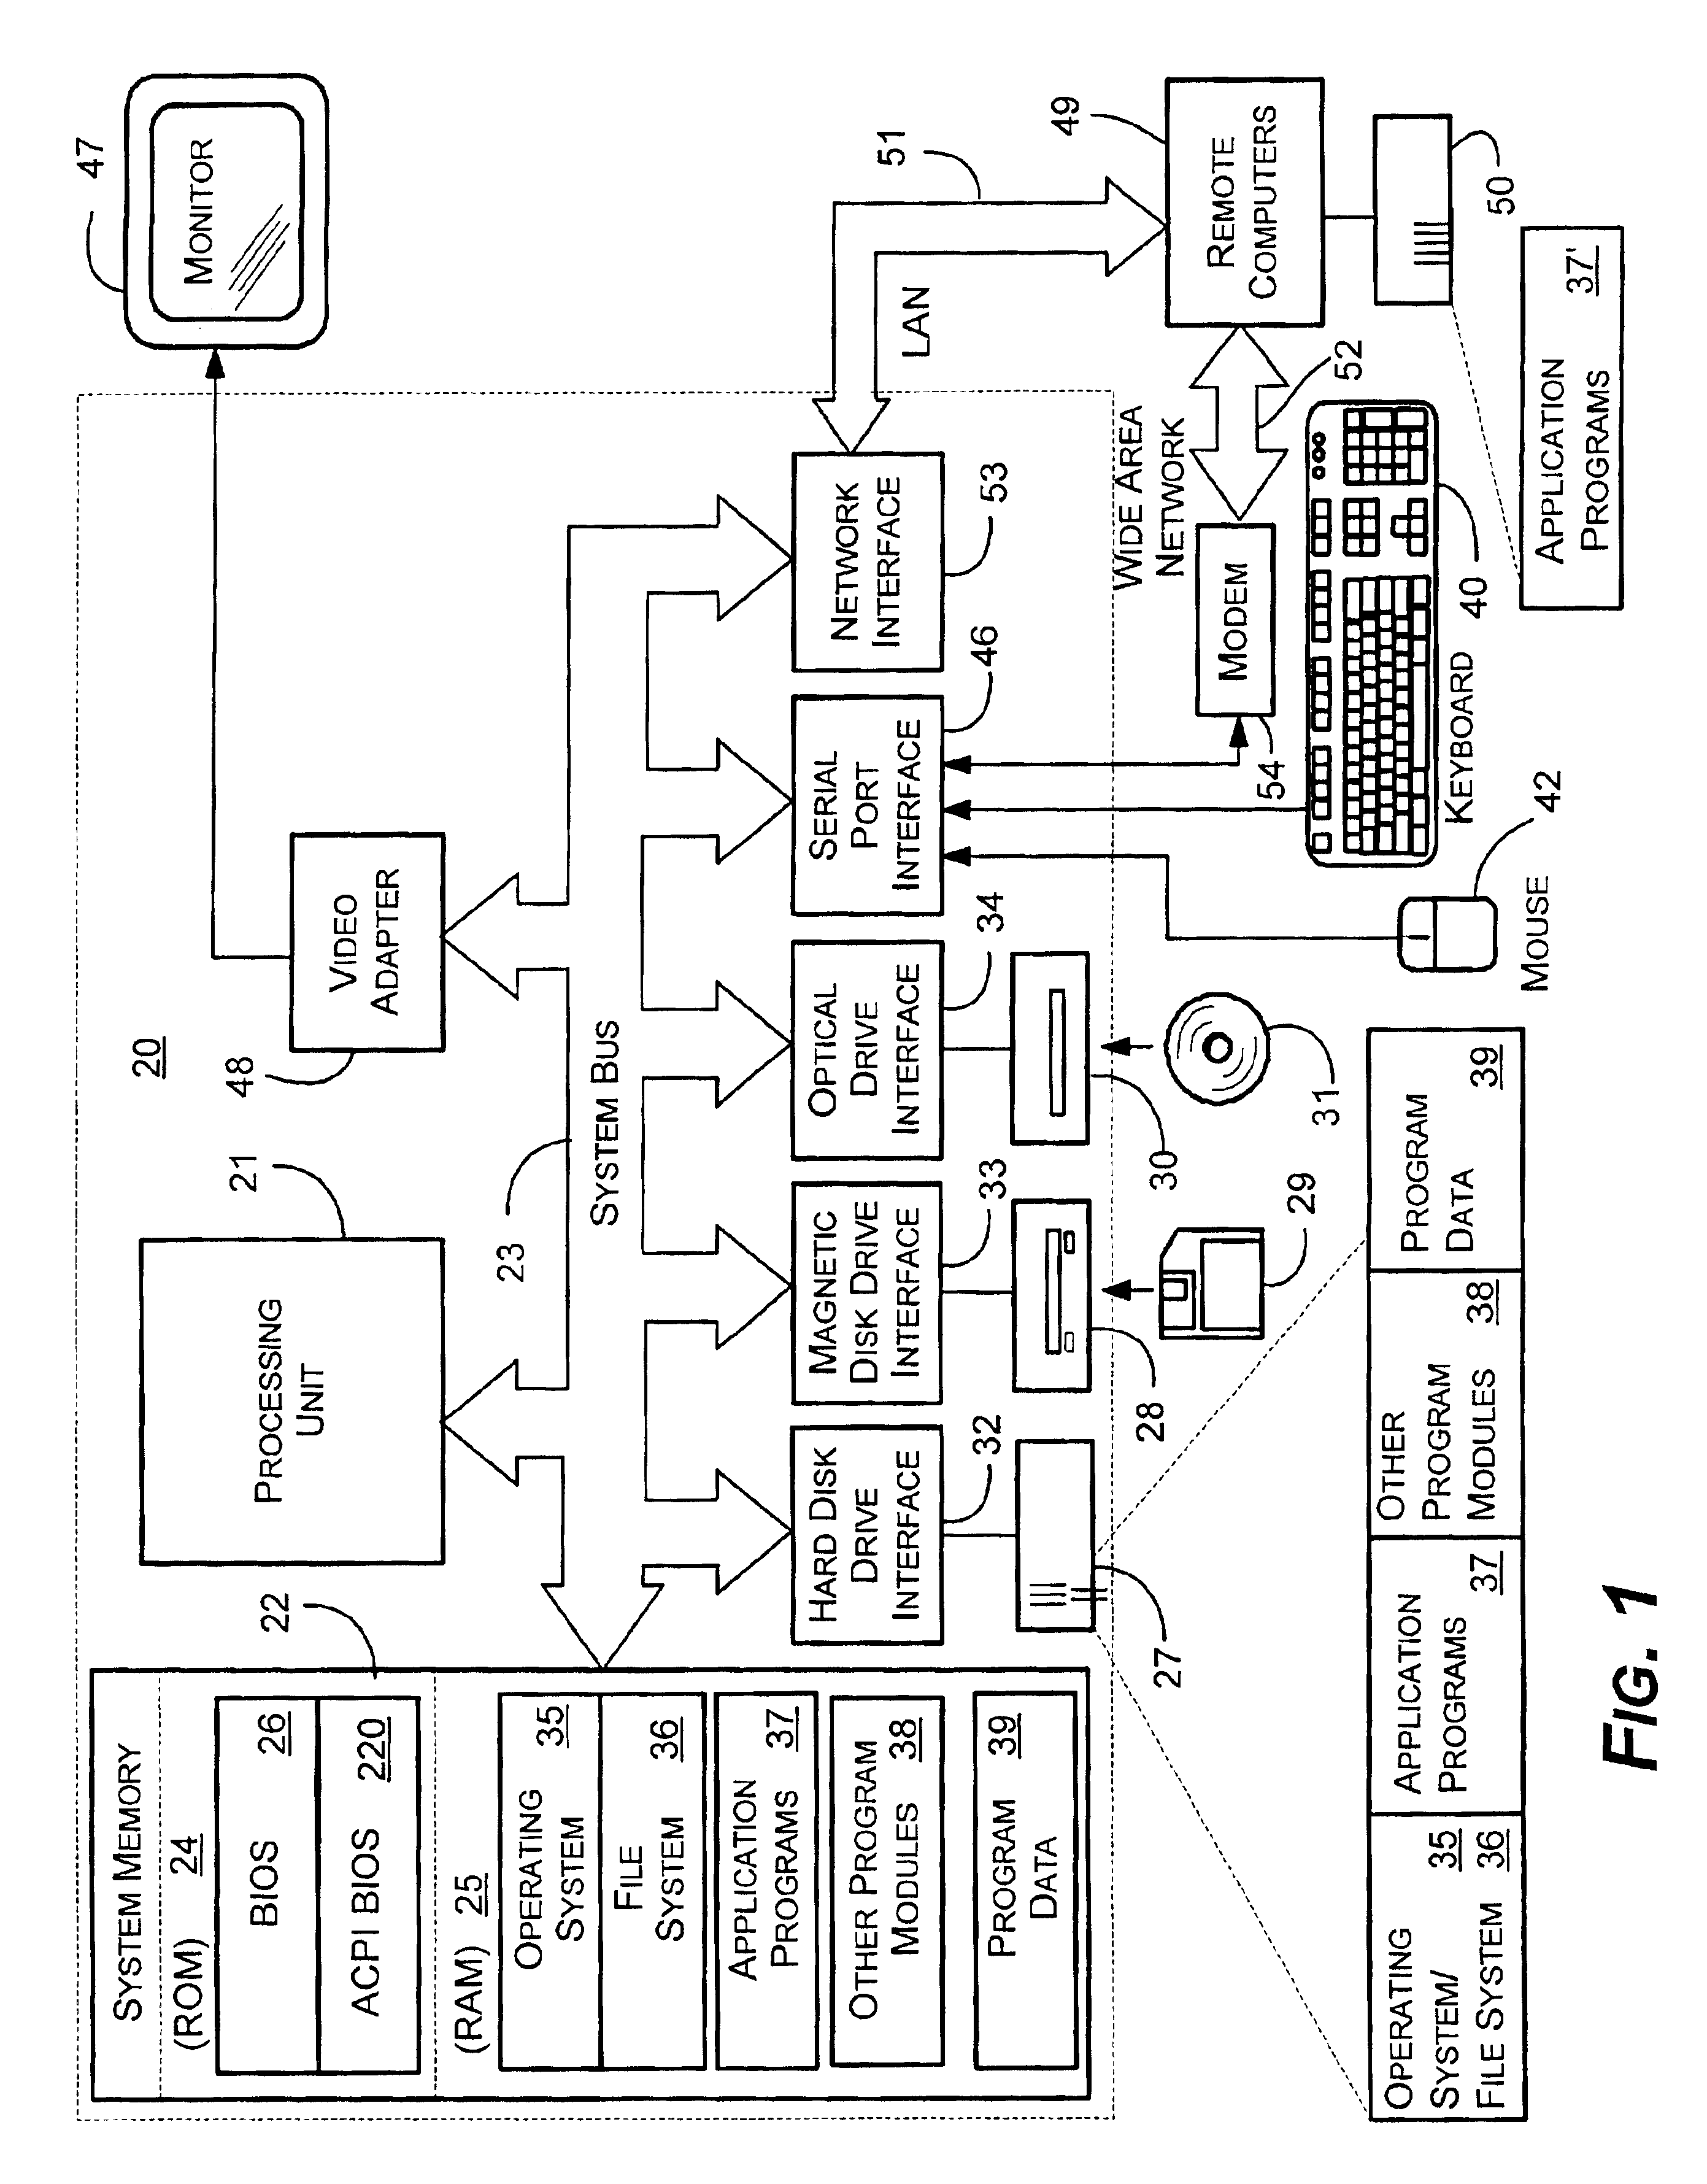 System and method for adding hardware registers to a power management and configuration system